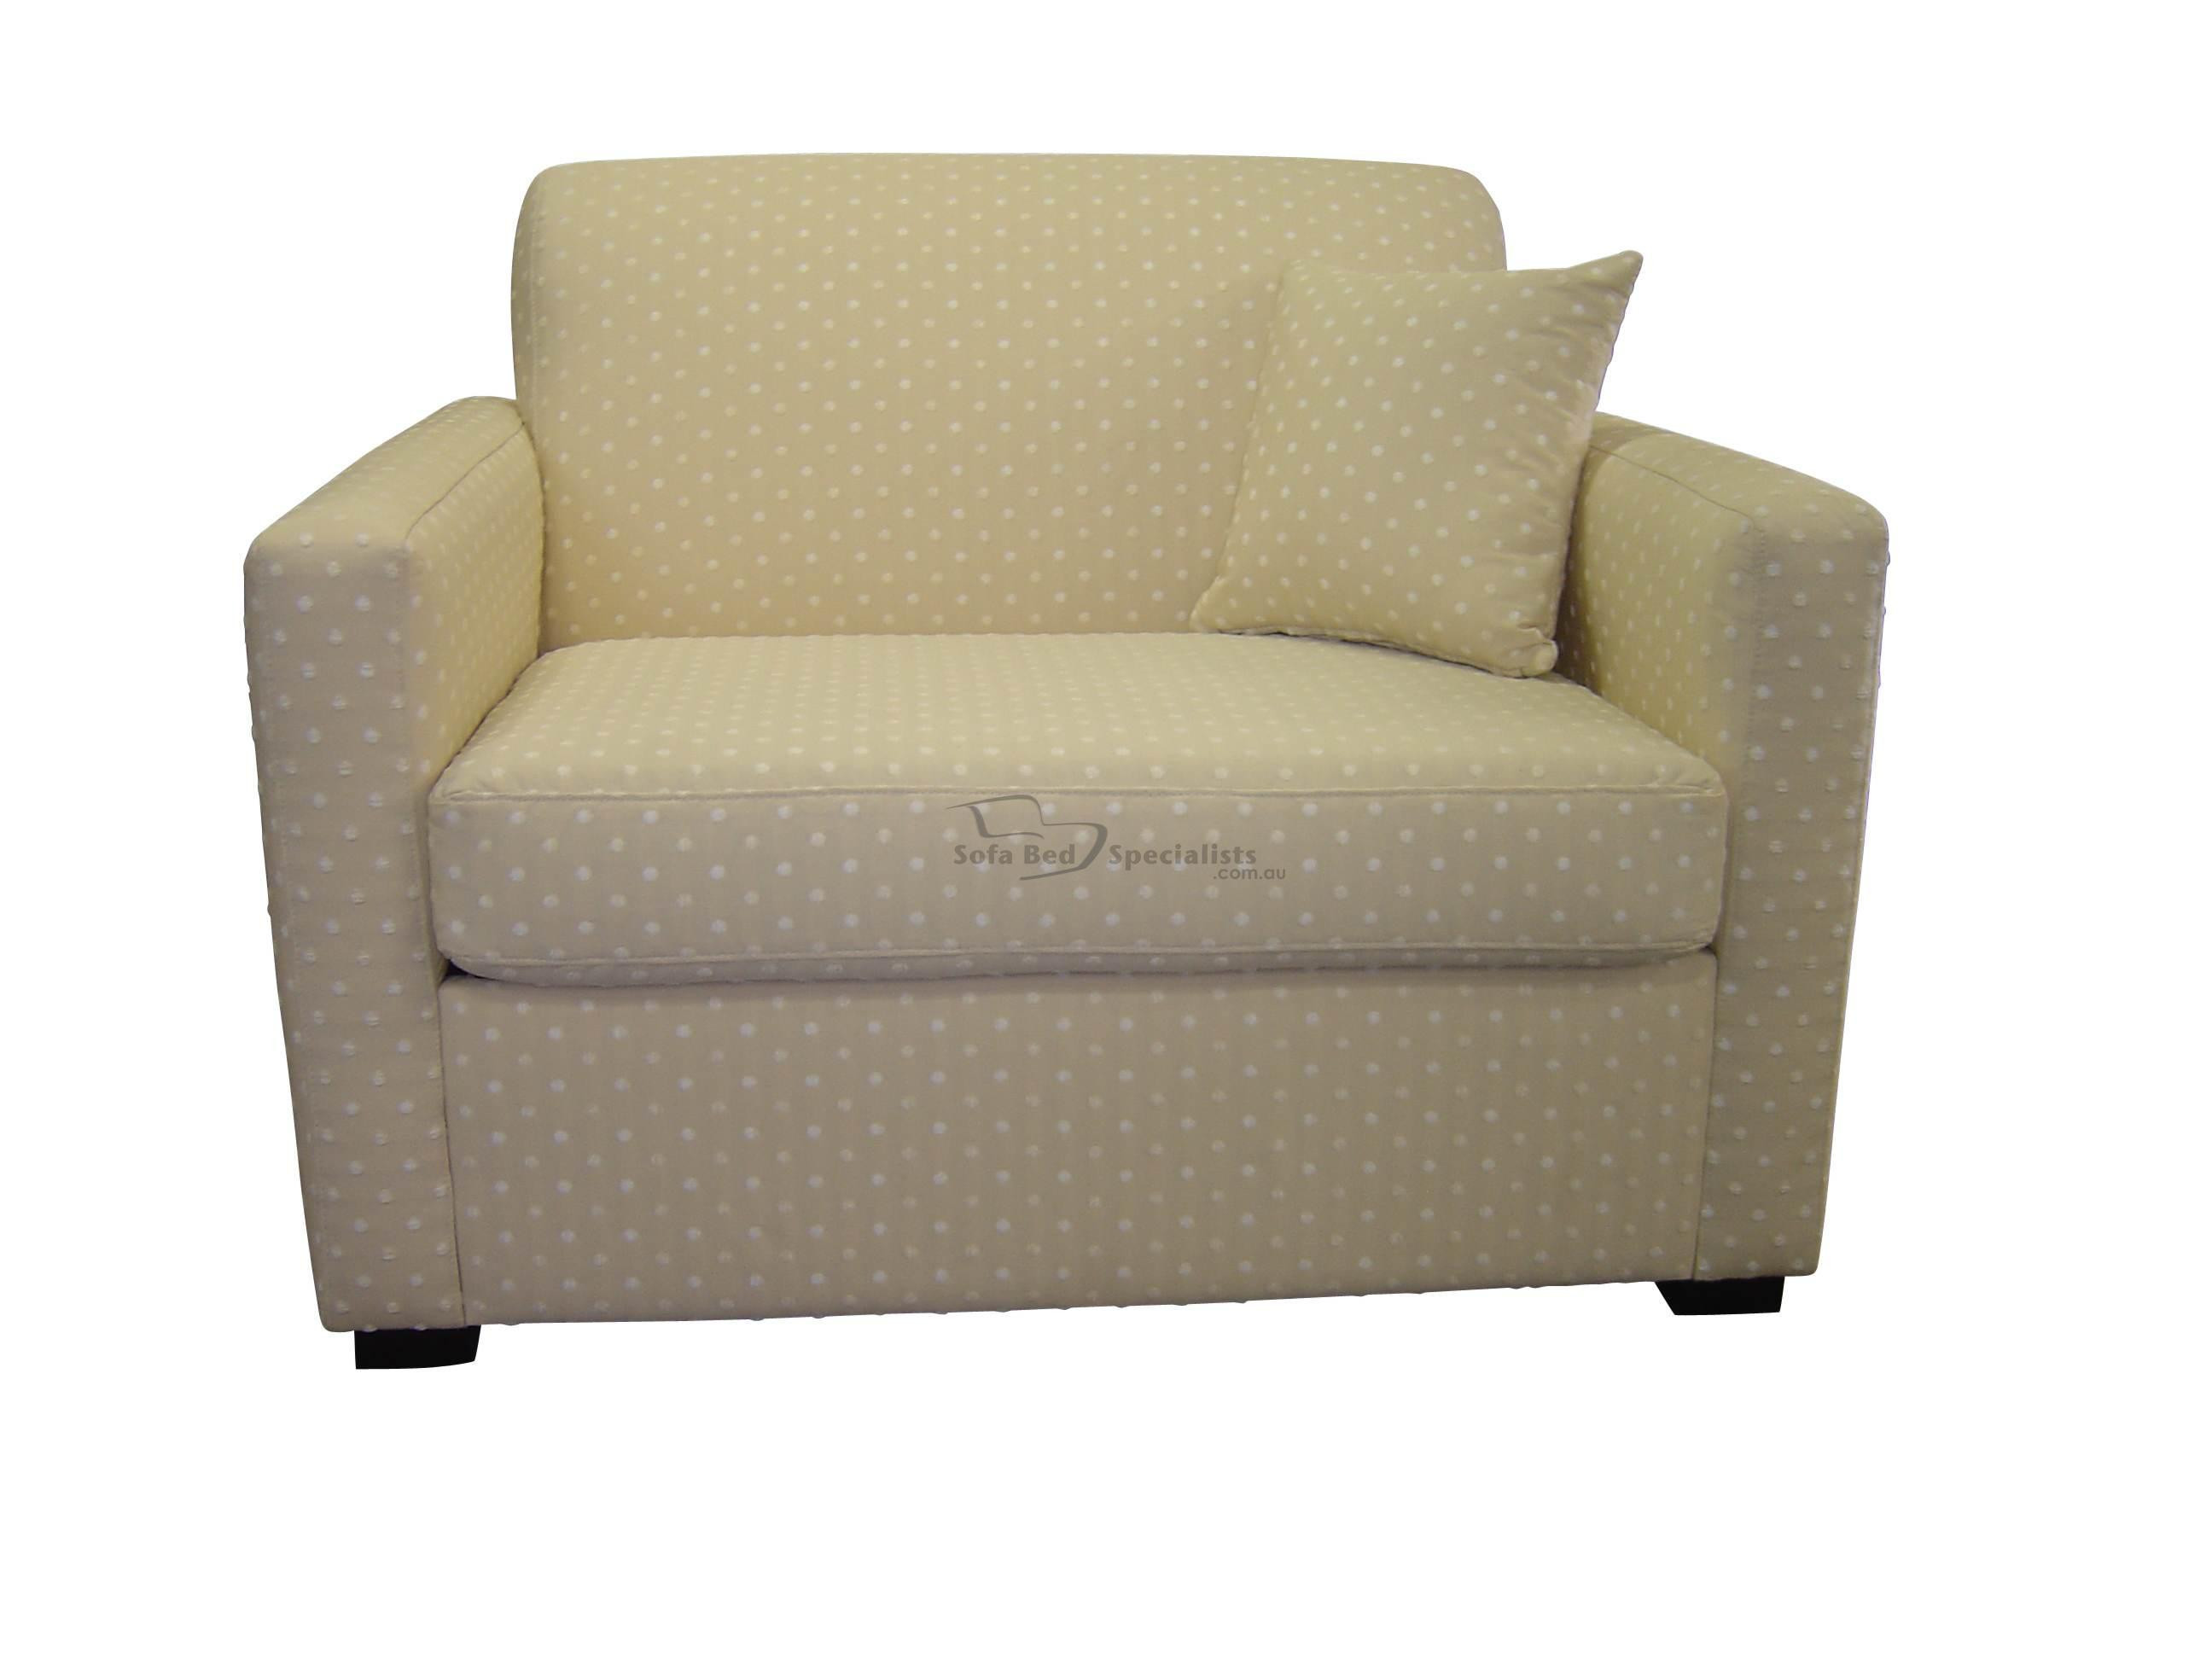 Best ideas about Sofa Chairs Beds
. Save or Pin Chair Sofabed Bowman Sofa Bed Specialists Now.